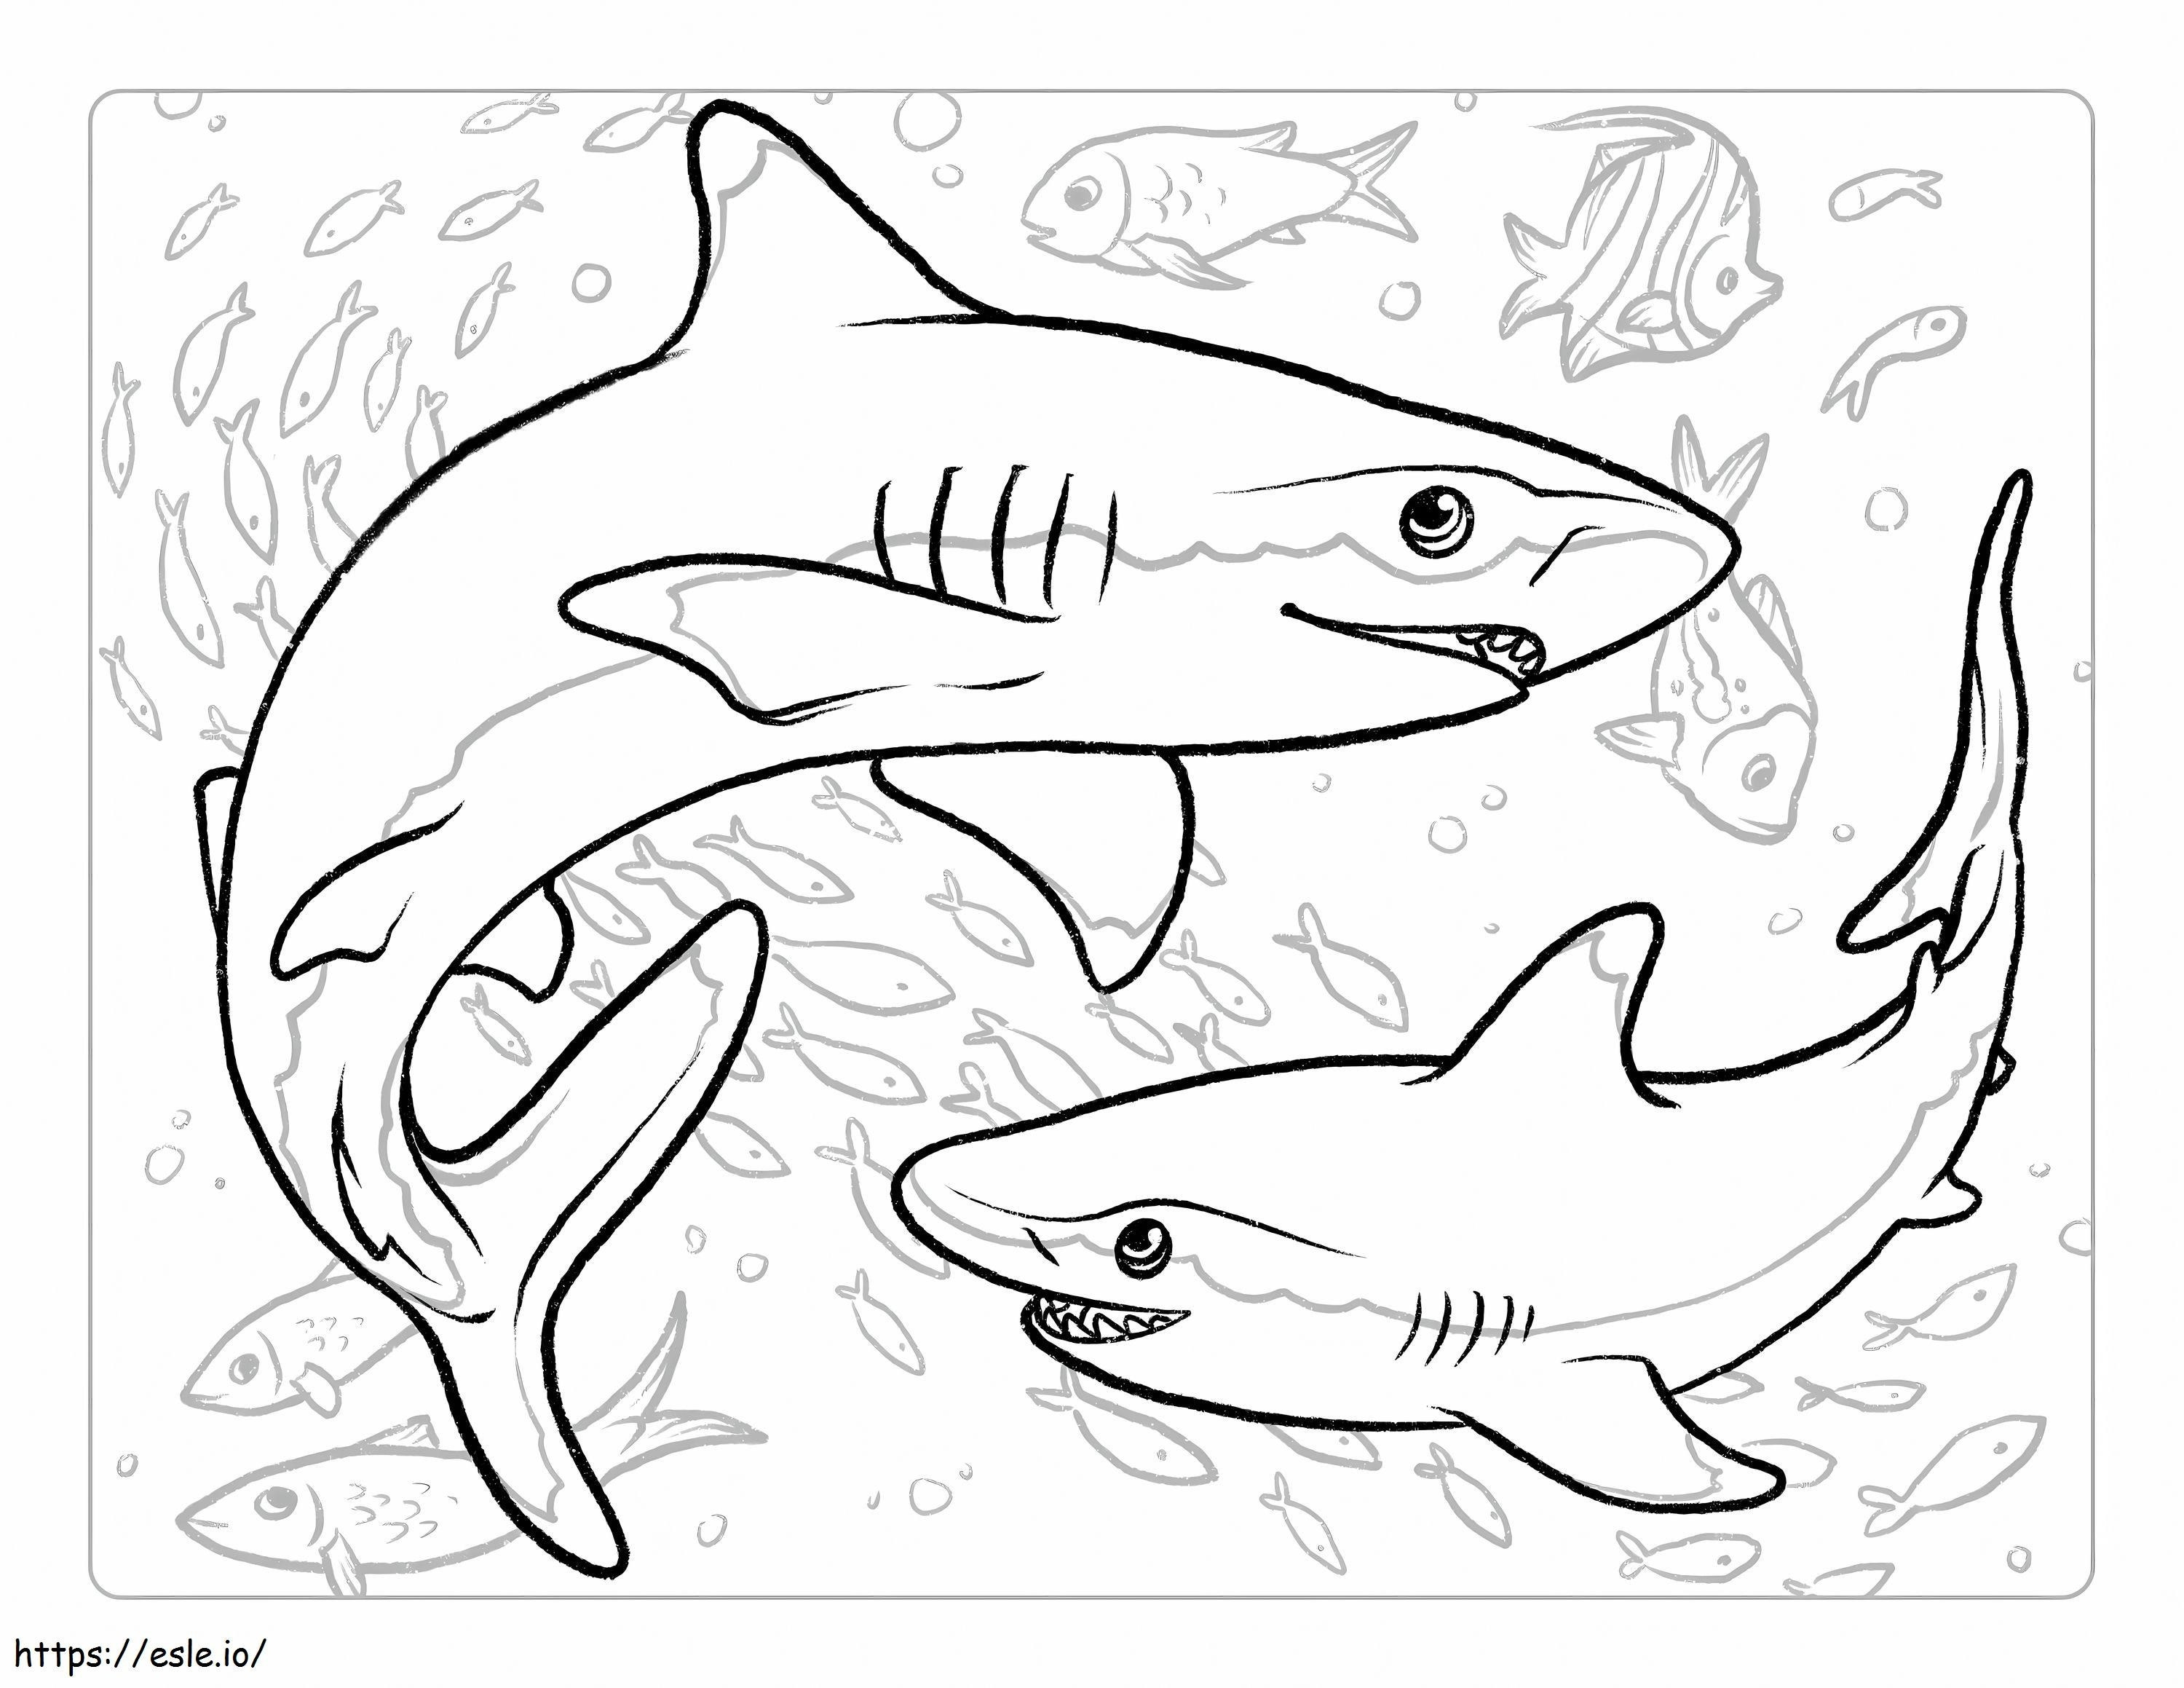 Two Sharks coloring page